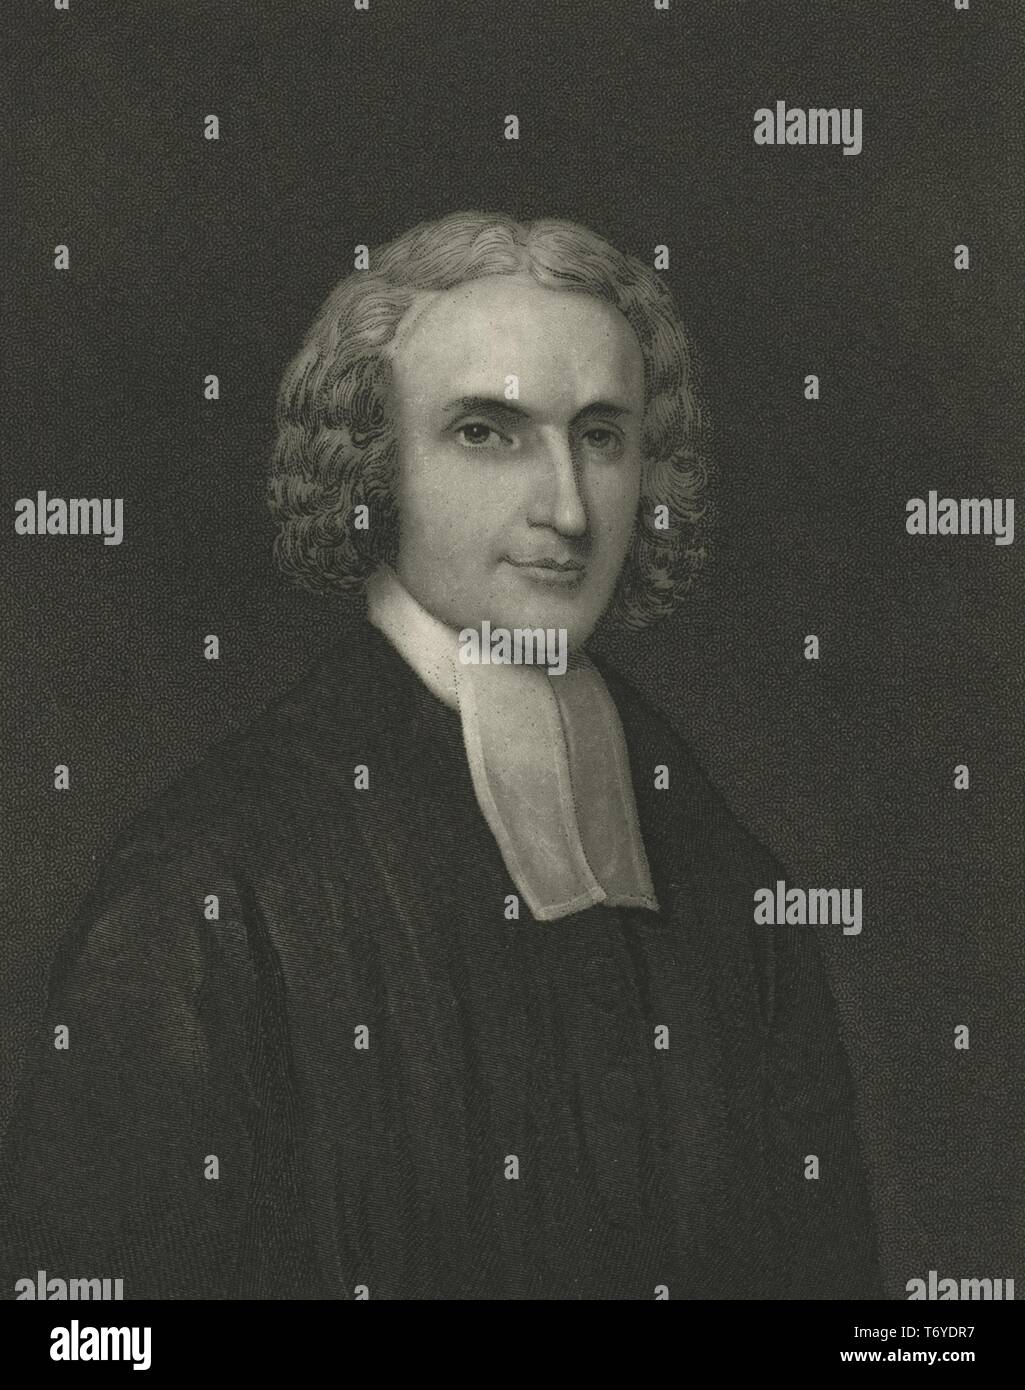 Engraved portrait of Aaron Burr, the third vice president of the United States, an American politician from Newark, New Jersey, British America, 1790. From the New York Public Library. () Stock Photo